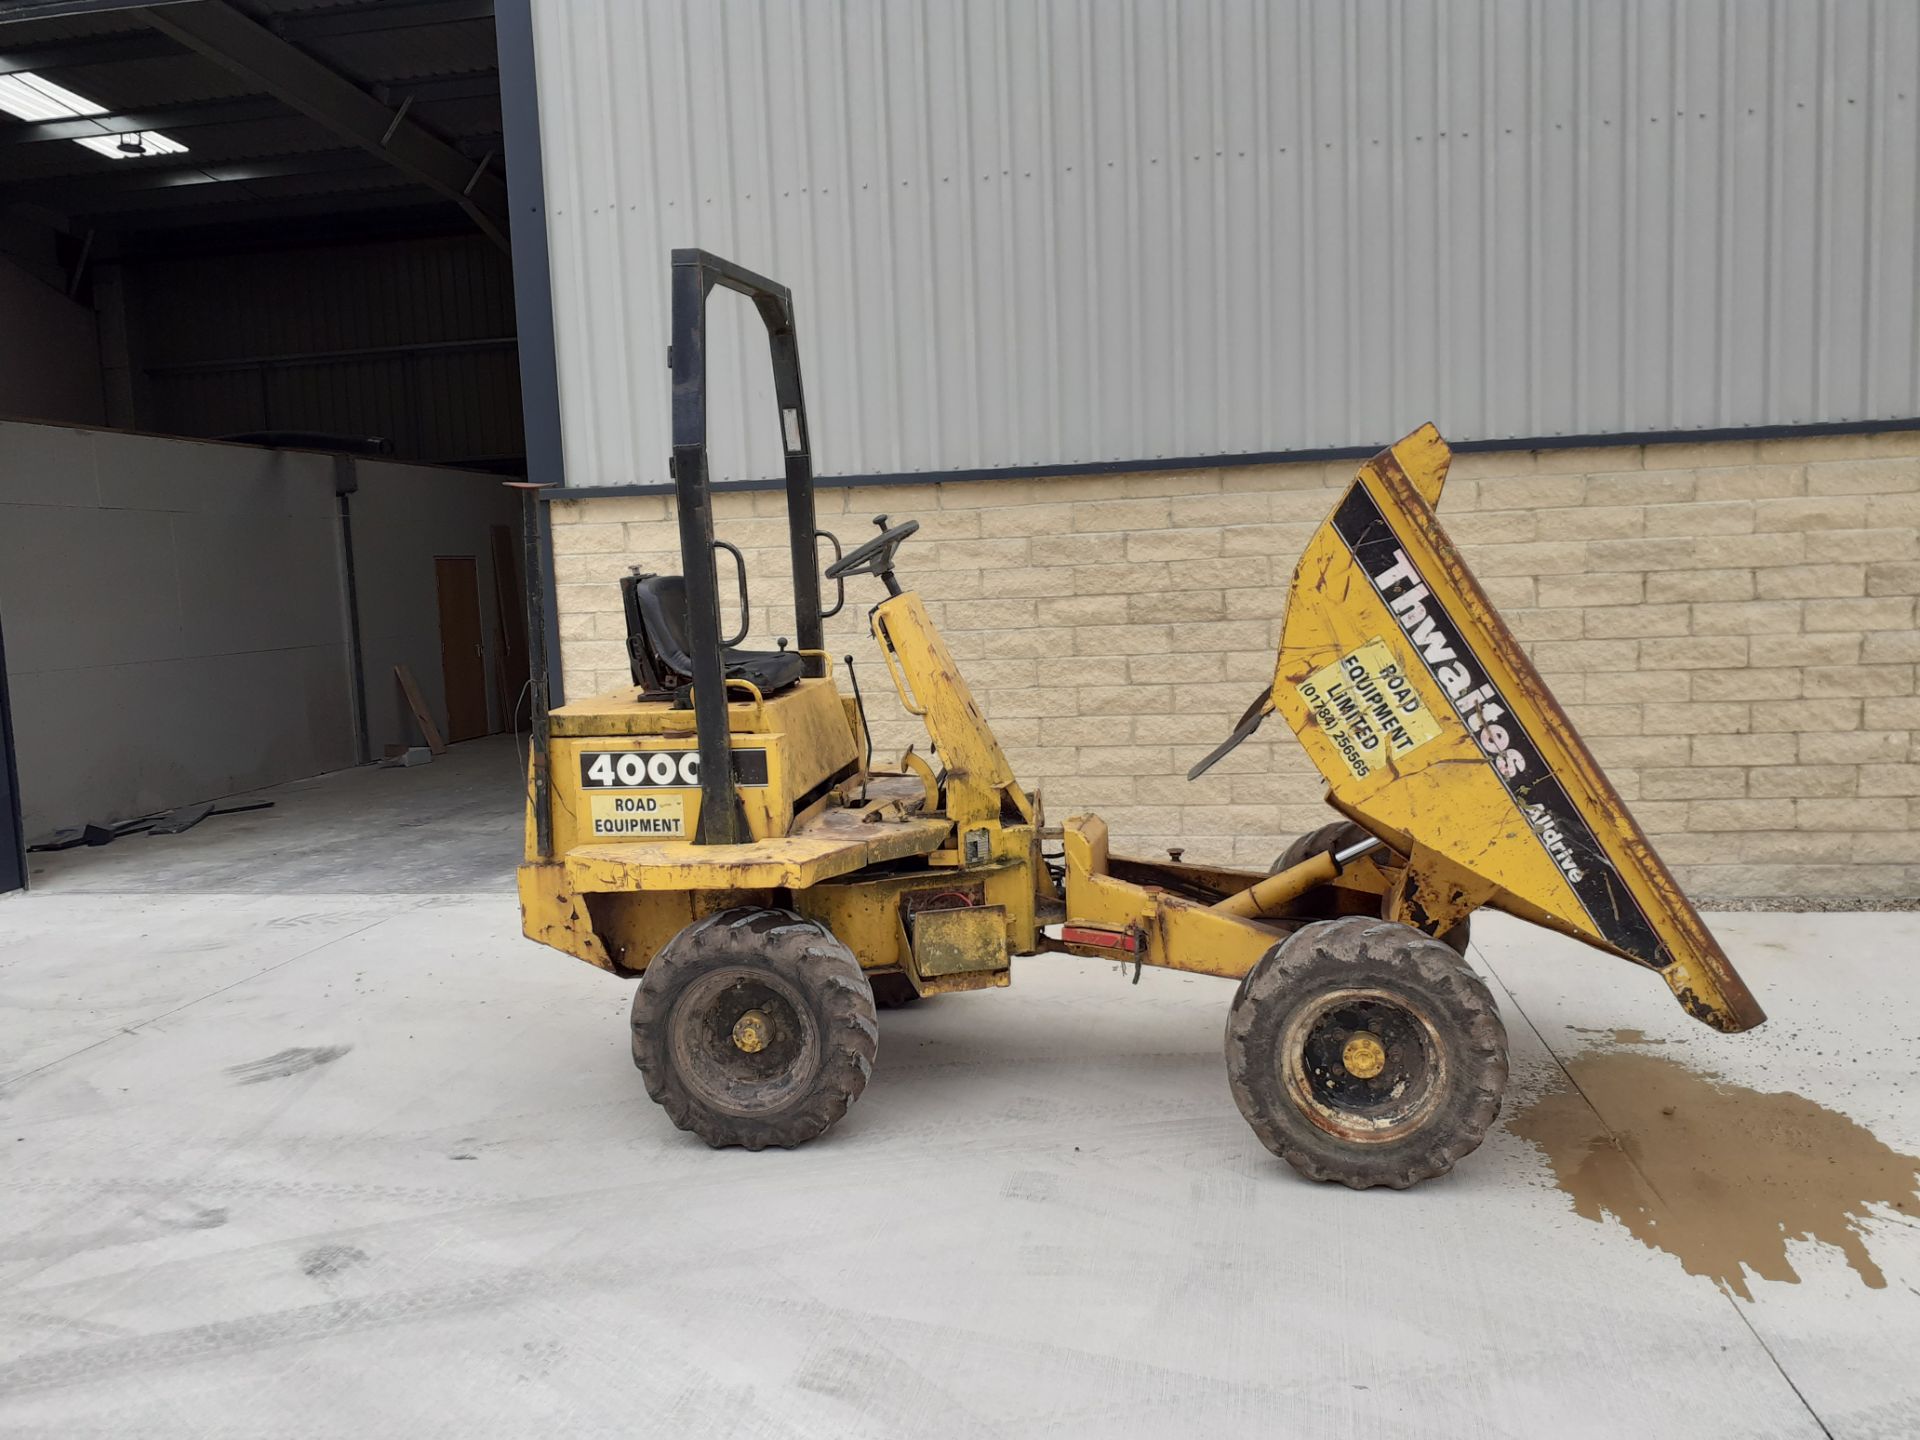 THWAITES 2 TONNE DUMPER, STARTS DRIVES TIPS, CHASSIS PLATE SHOWS 1998, WAS ROAD REGISTERED IN 2001 - Image 5 of 5